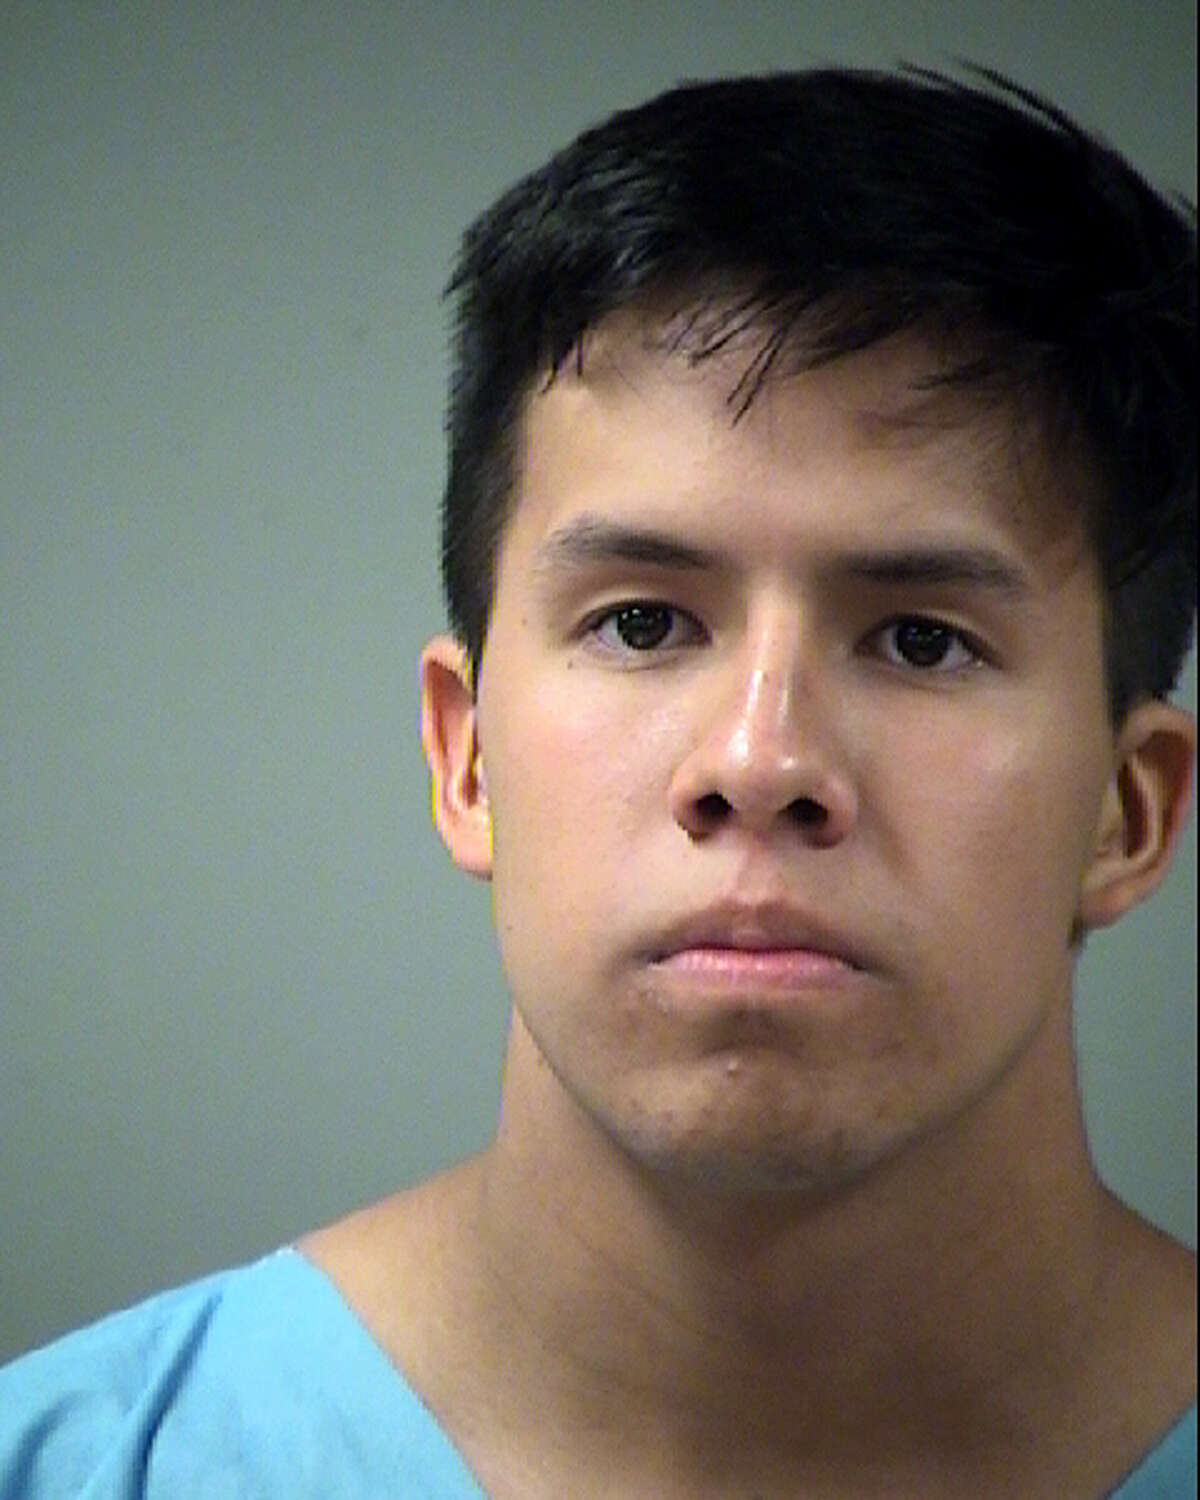 Hugo Salazar was indicted on for aggravated sexual assault of a child on Nov. 14, 2018.